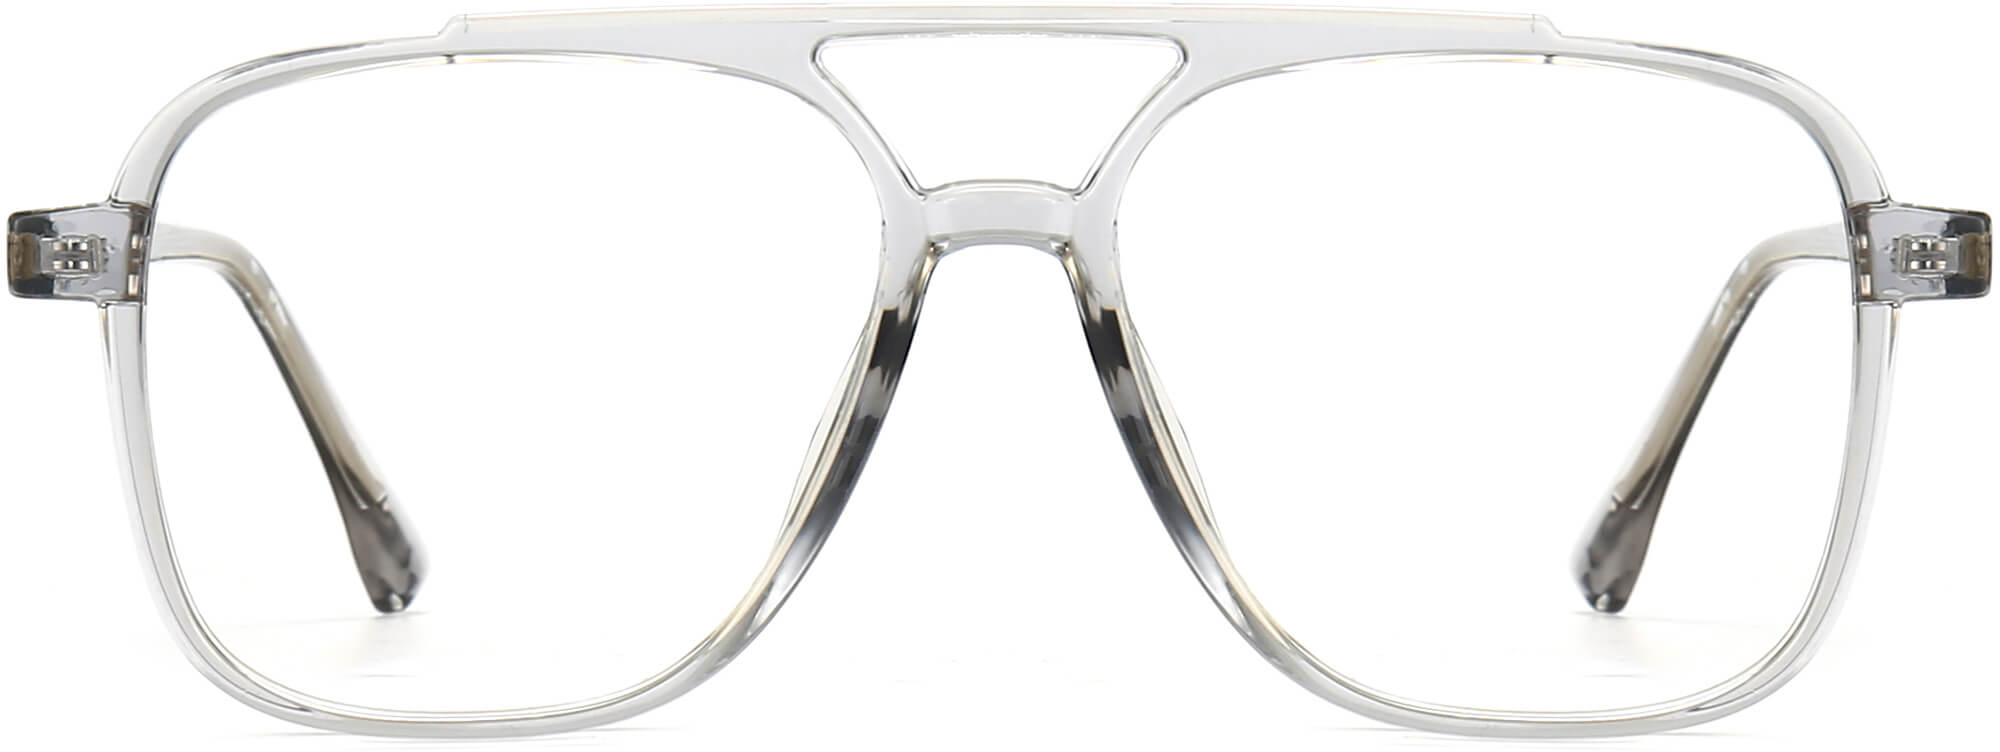 Jamir Square Gray Eyeglasses from ANRRI, front view